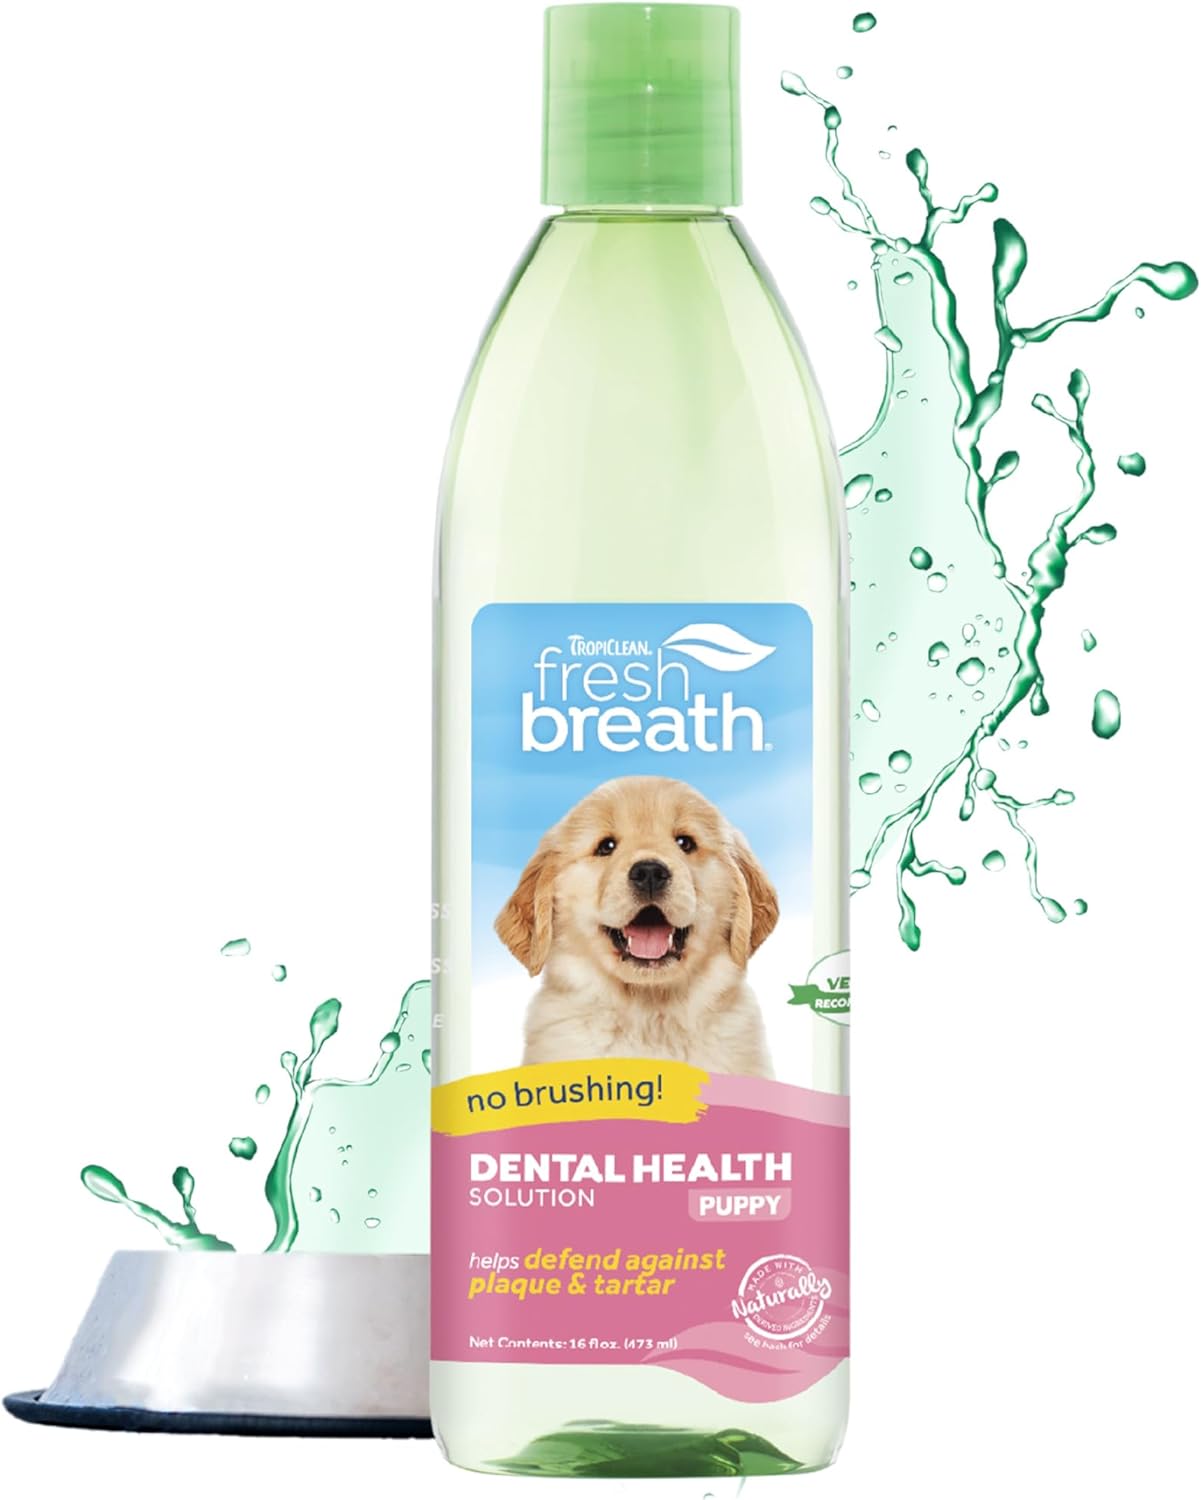 TropiClean Fresh Breath Puppy Teeth Cleaning – Puppy Dental Care for Bad Breath - Breath Freshener - Water Additive Mouthwash – Helps Remove Plaque Off Pups Teeth, For Puppies, 473ml?FBWA16Z-PP